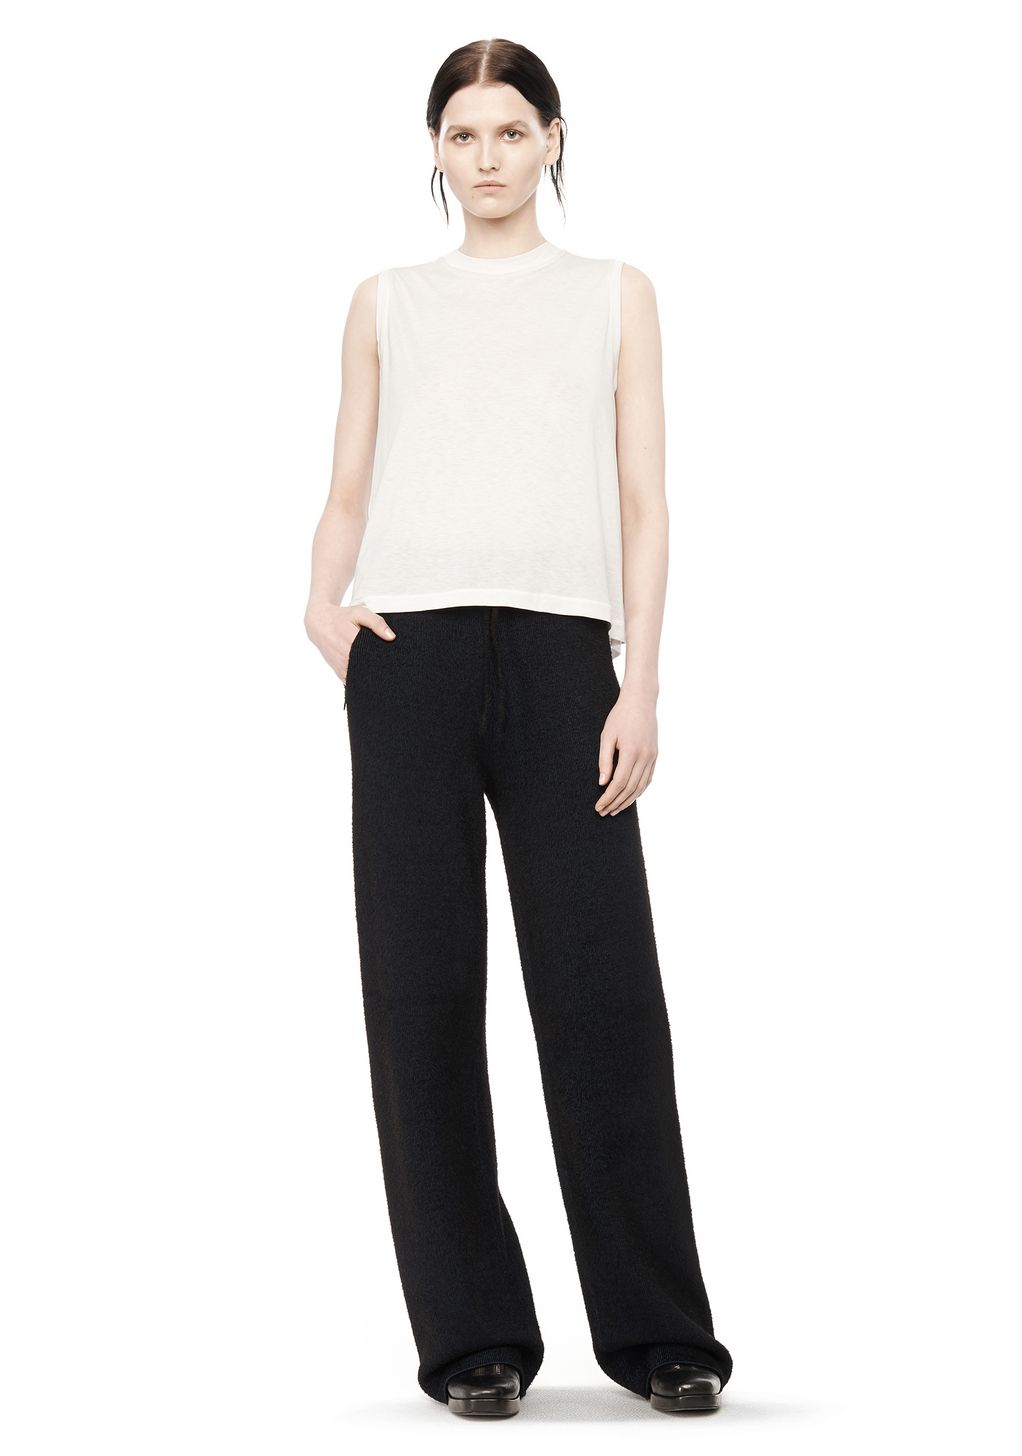 Alexander Wang ‎CLASSIC HIGH NECK FLARED TANK ‎ ‎TOP‎ | Official Site